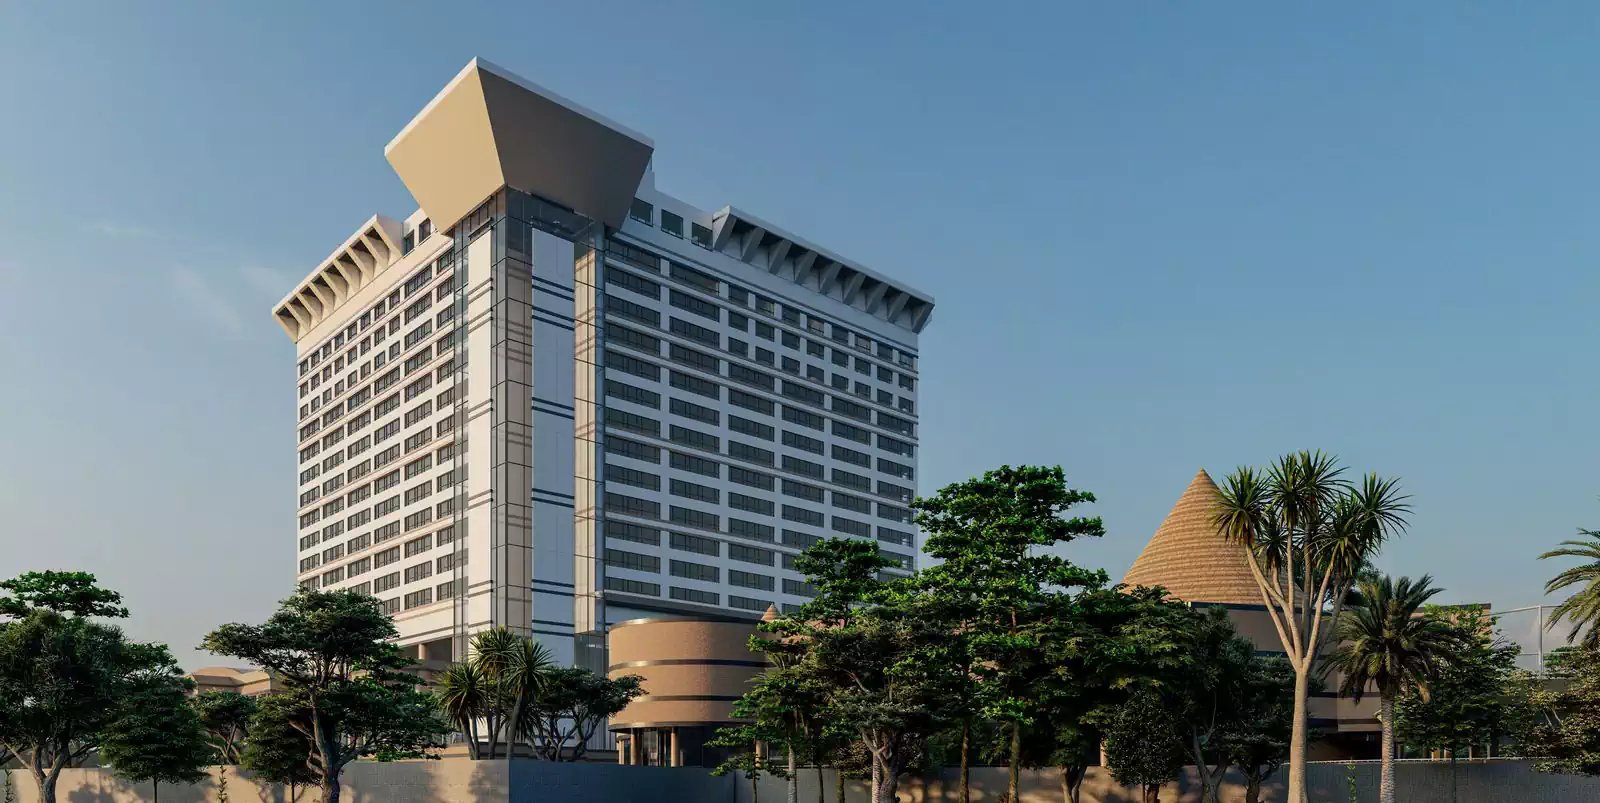 Multistory hotel design in Lagos, Nigeria by Zimbabwean Pantic Architects